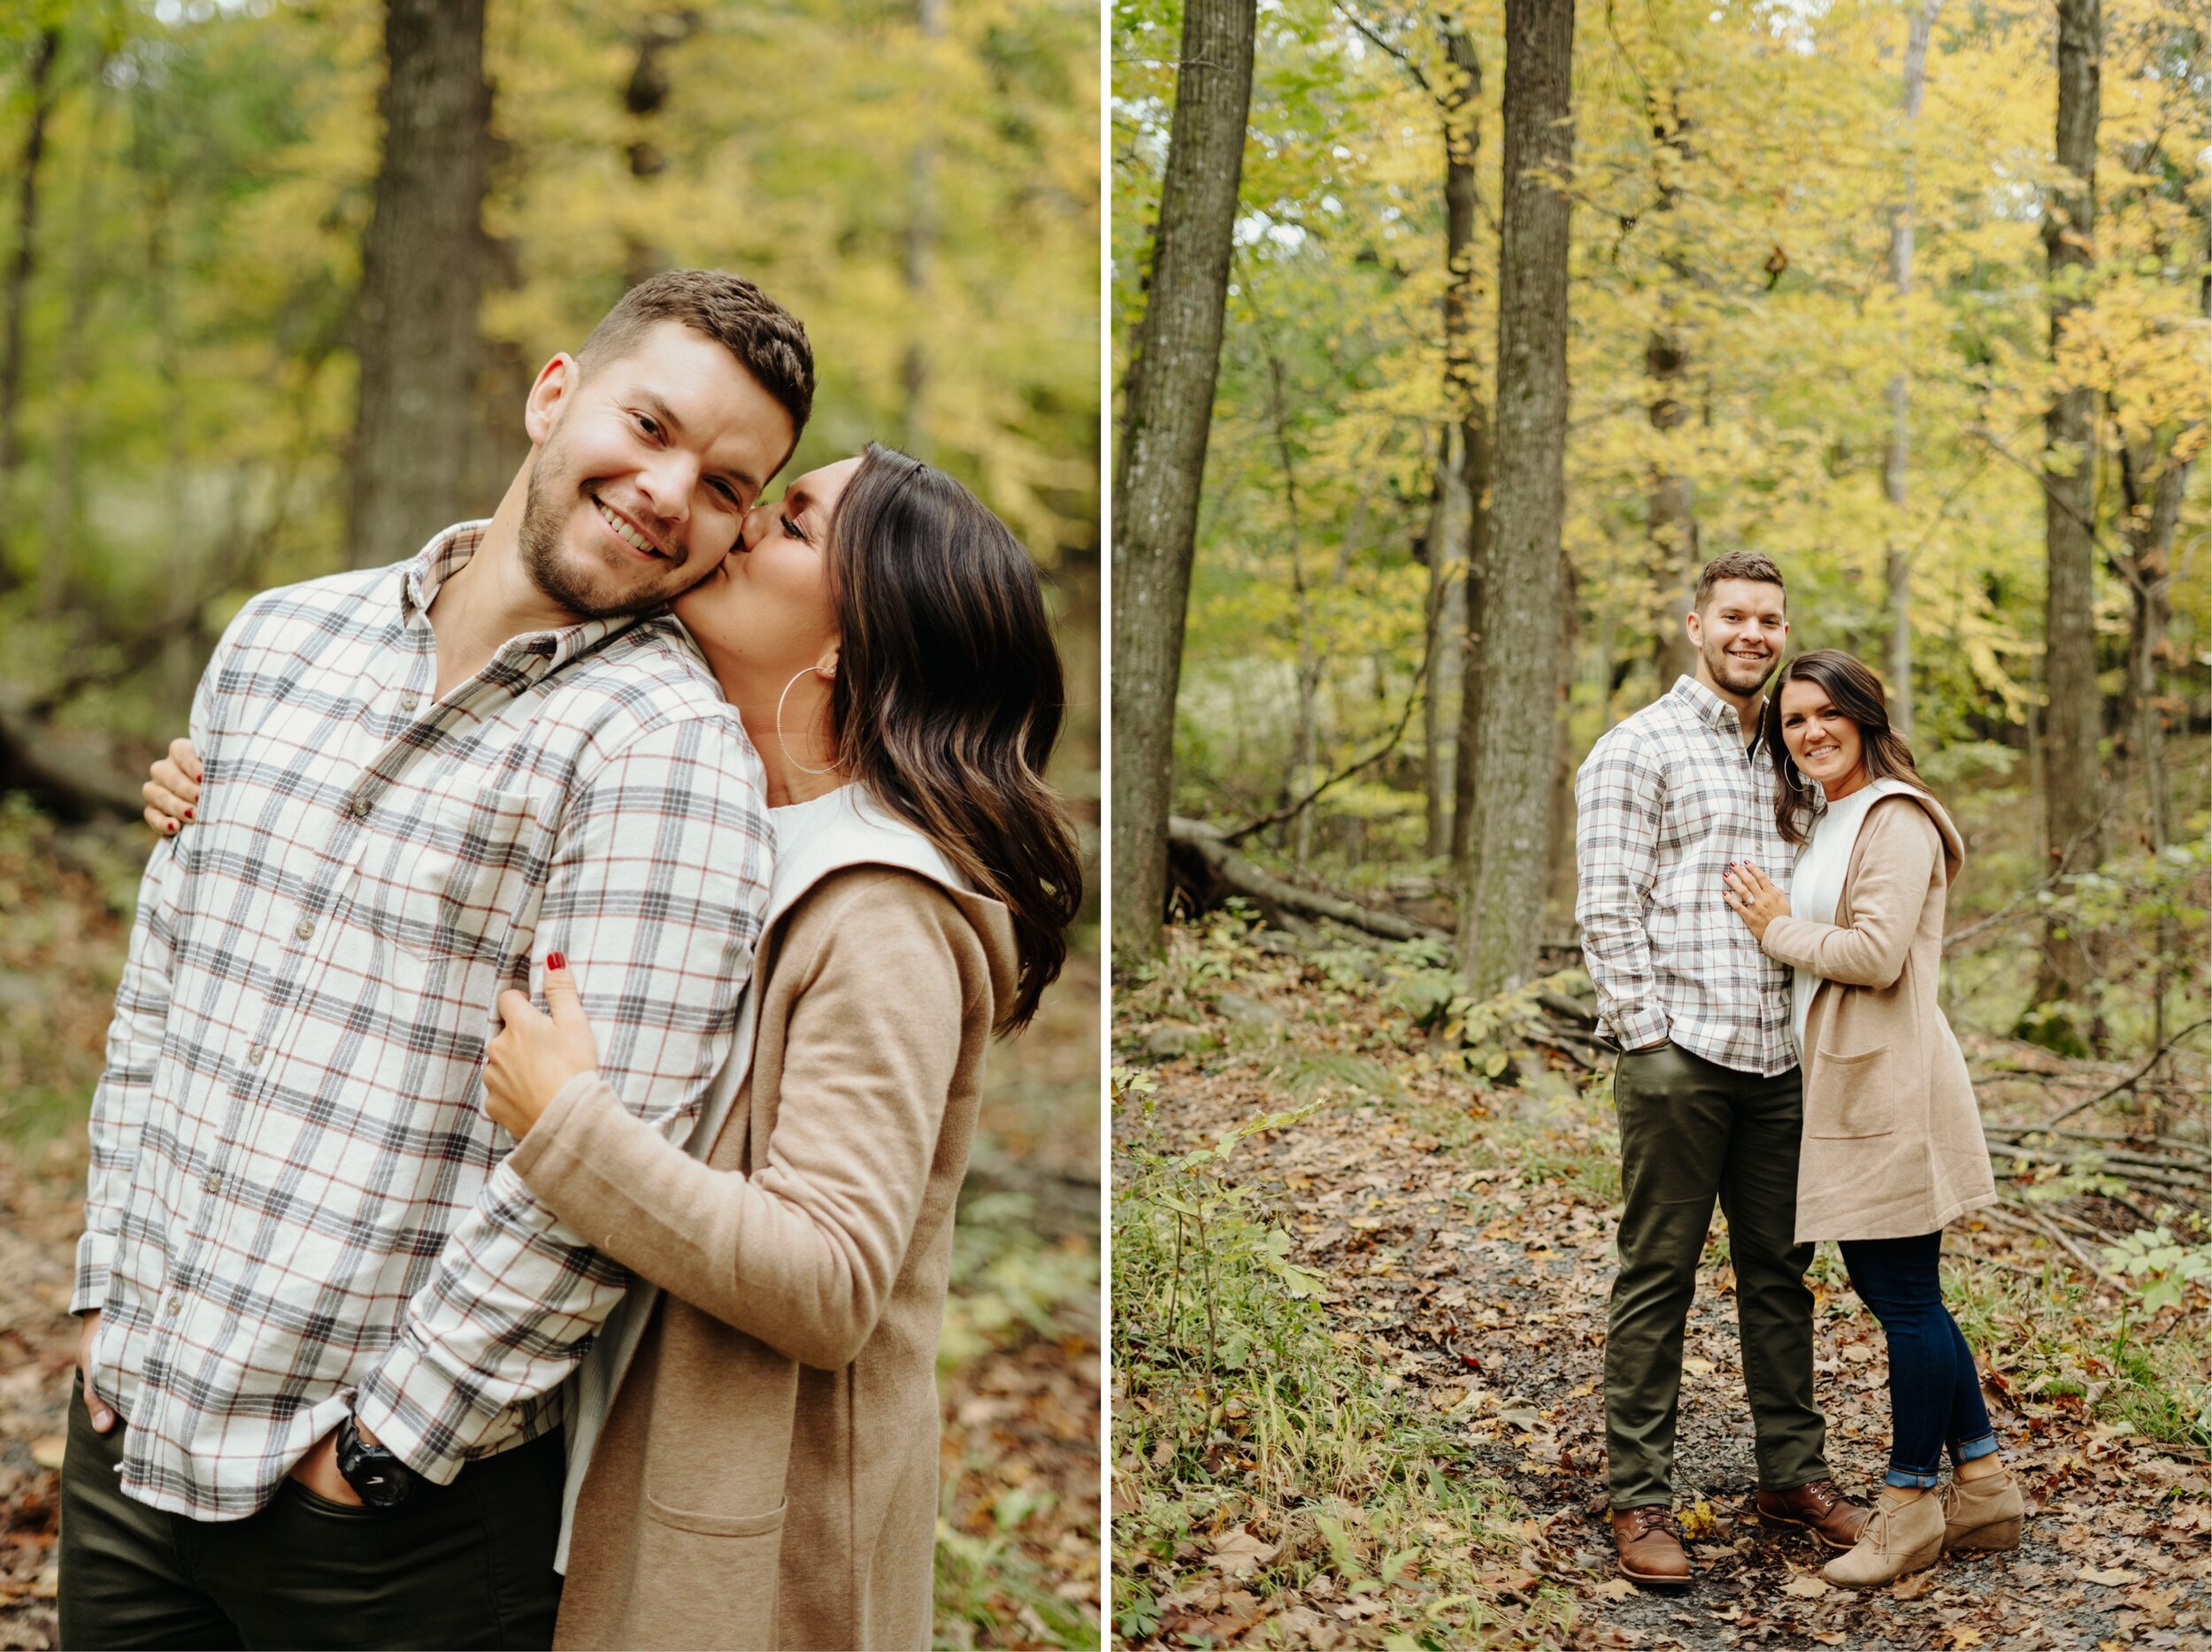 19_taylors-falls-engagement-session-interstate-park-mckenzie-josh-38_taylors-falls-engagement-session-interstate-park-mckenzie-josh-35.jpg